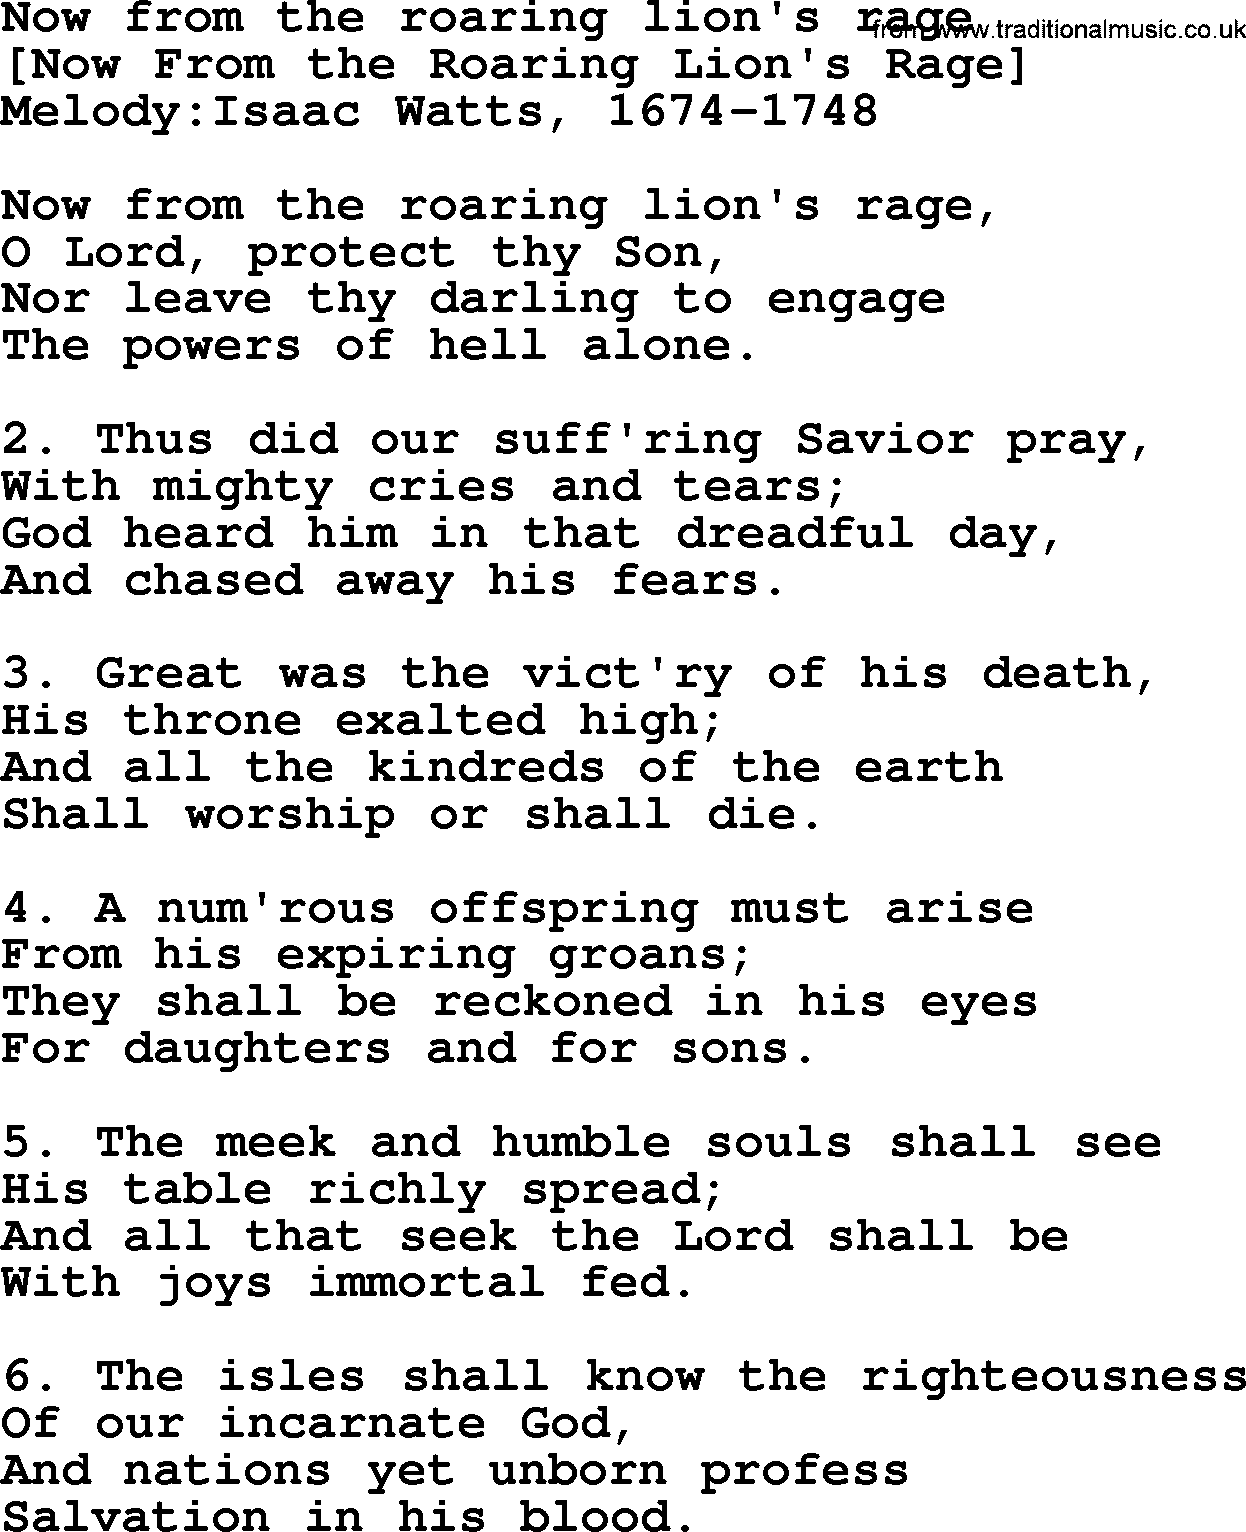 Old English Song: Now From The Roaring Lion's Rage lyrics